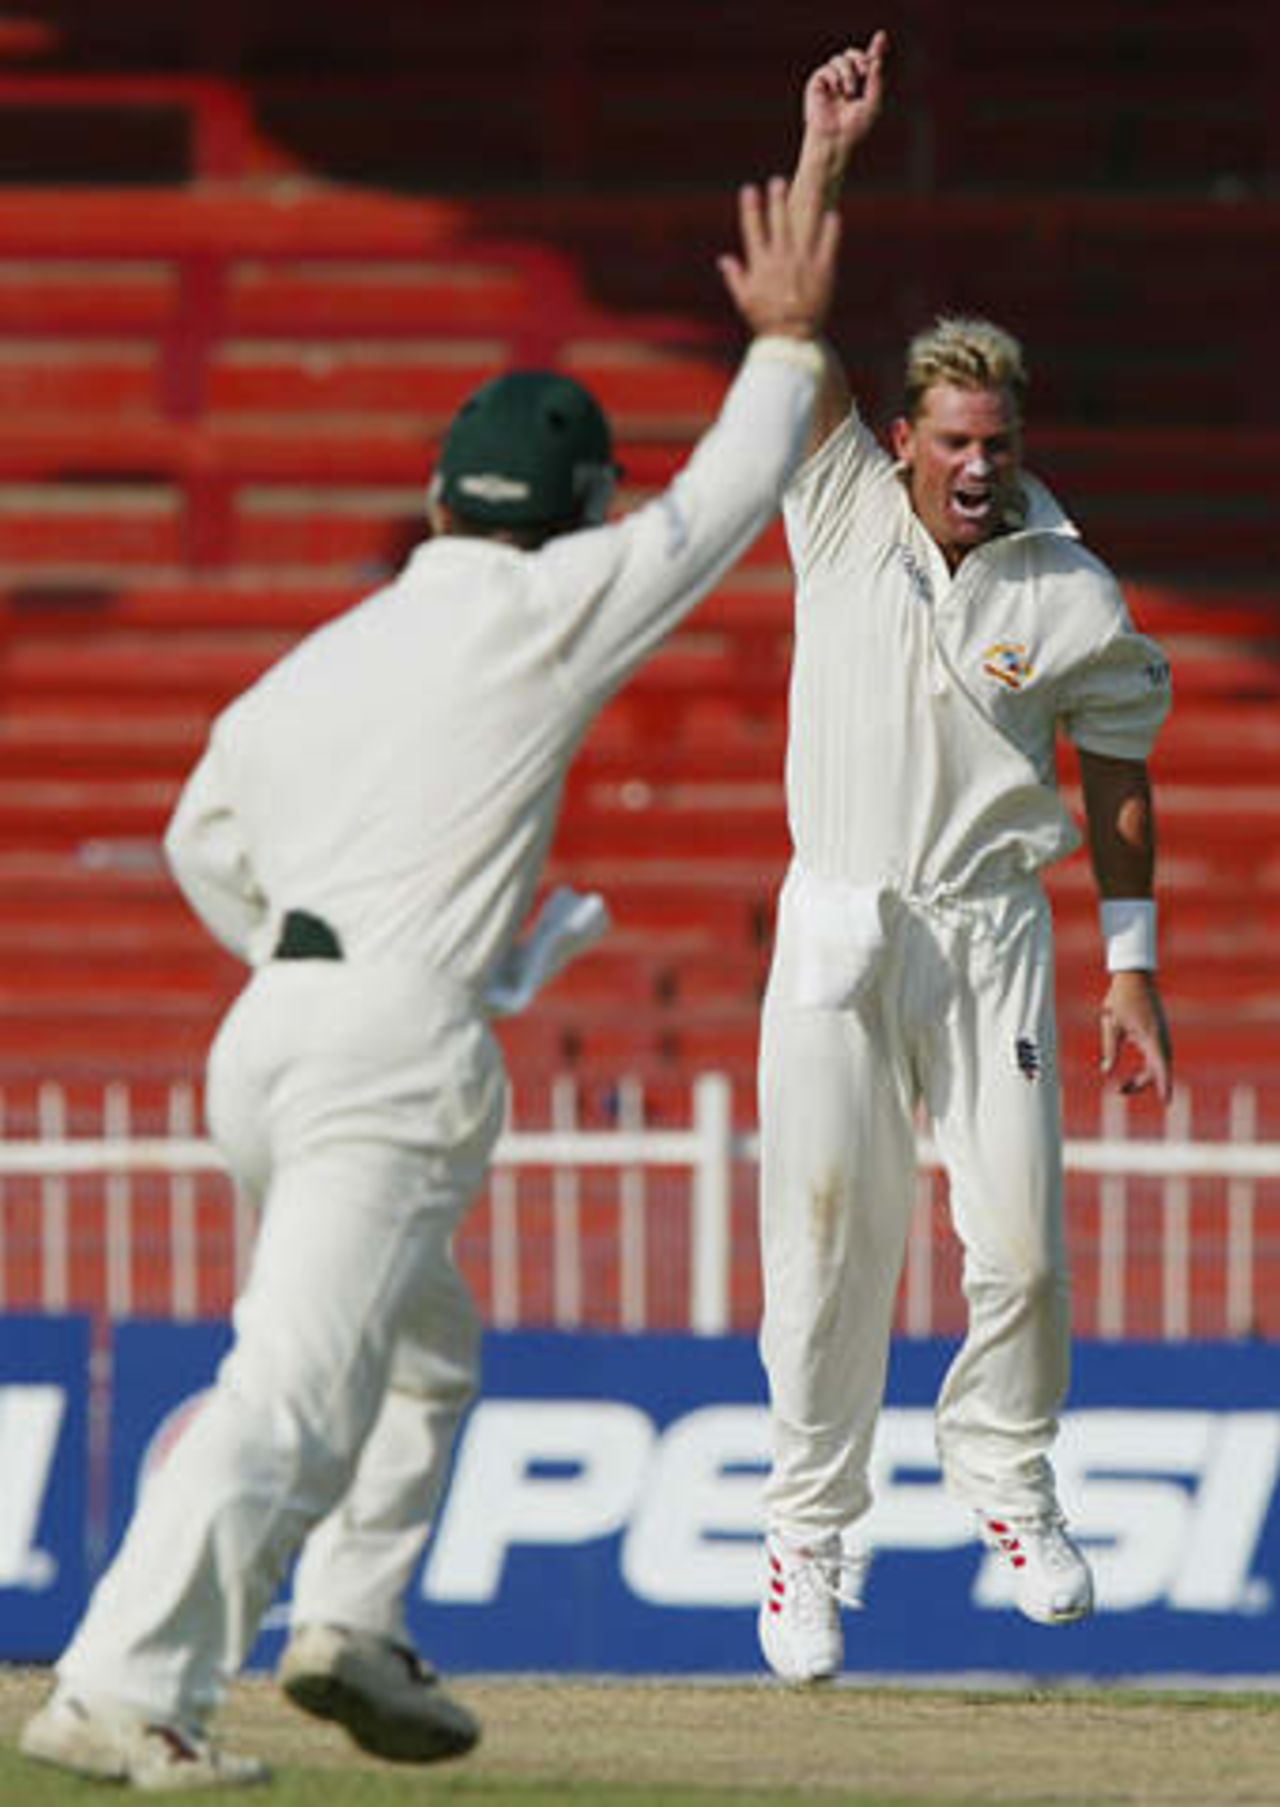 Australian spin bowler Shane Warne and team mate Justin Langer (L) celebrate the dismissal of Pakistan's Imran Nazir at Sharjah's stadium October 12, 2002 on the second day of their second cricket test match. The second and third tests are being held in the neutral venue of Sharjah after Australia balked at playing in Pakistan due to security concerns.